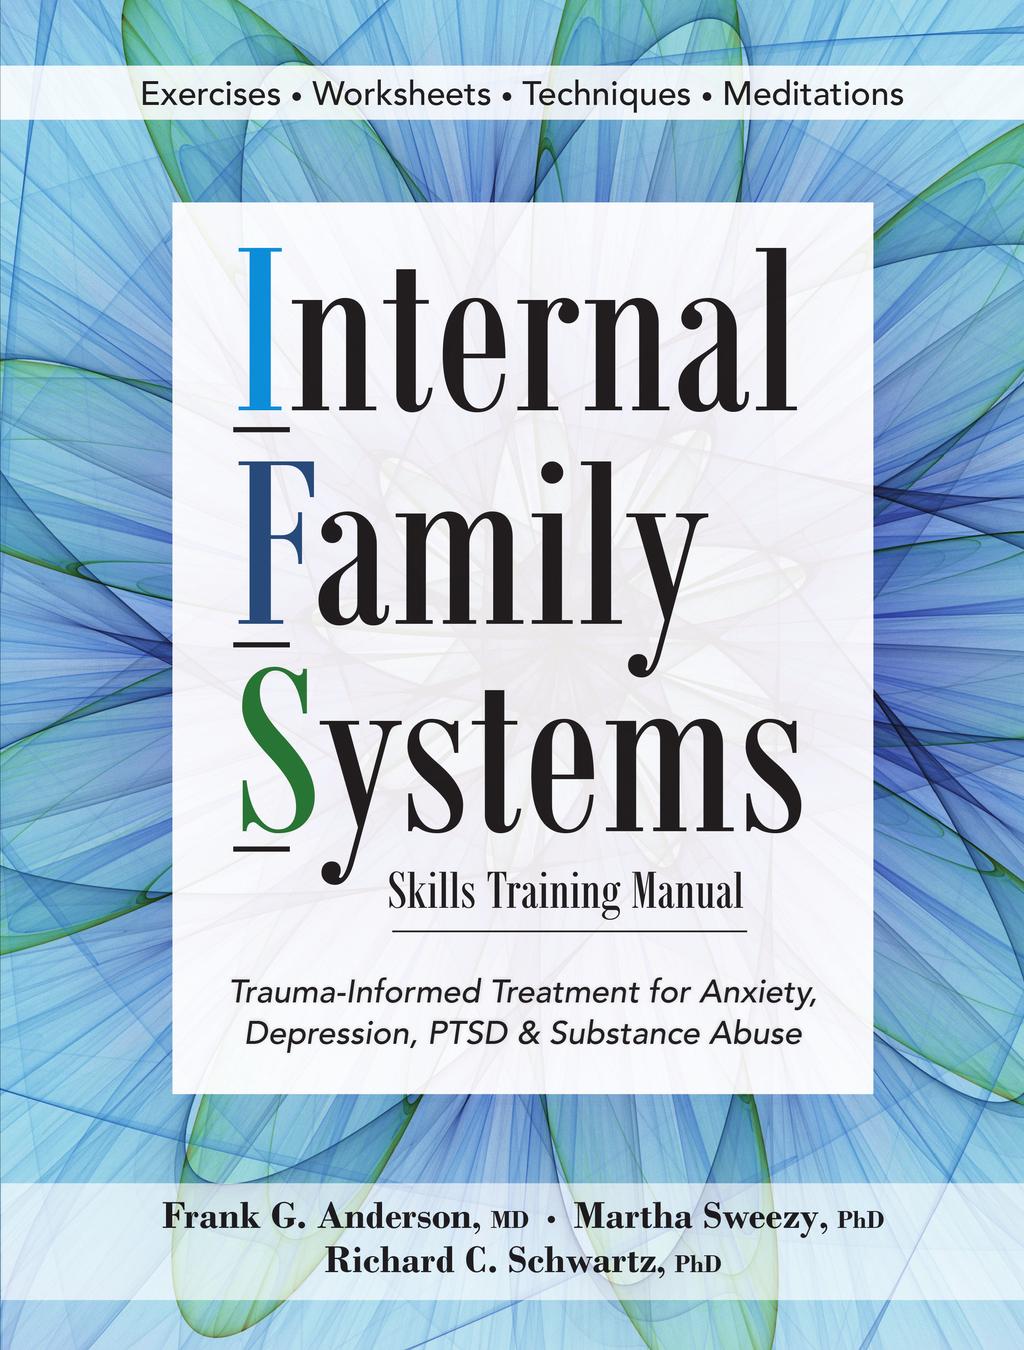 Trauma-Informed Treatment for Anxiety, Depression, PTSD & Substance Abuse By Frank G. Anderson, M.D., Martha Sweezy, Ph.D., Richard Schwartz, Ph.D. E TUITIO RE N F A revolutionary treatment plan for PTSD, anxiety, depression, substance abuse, eating disorders and more.